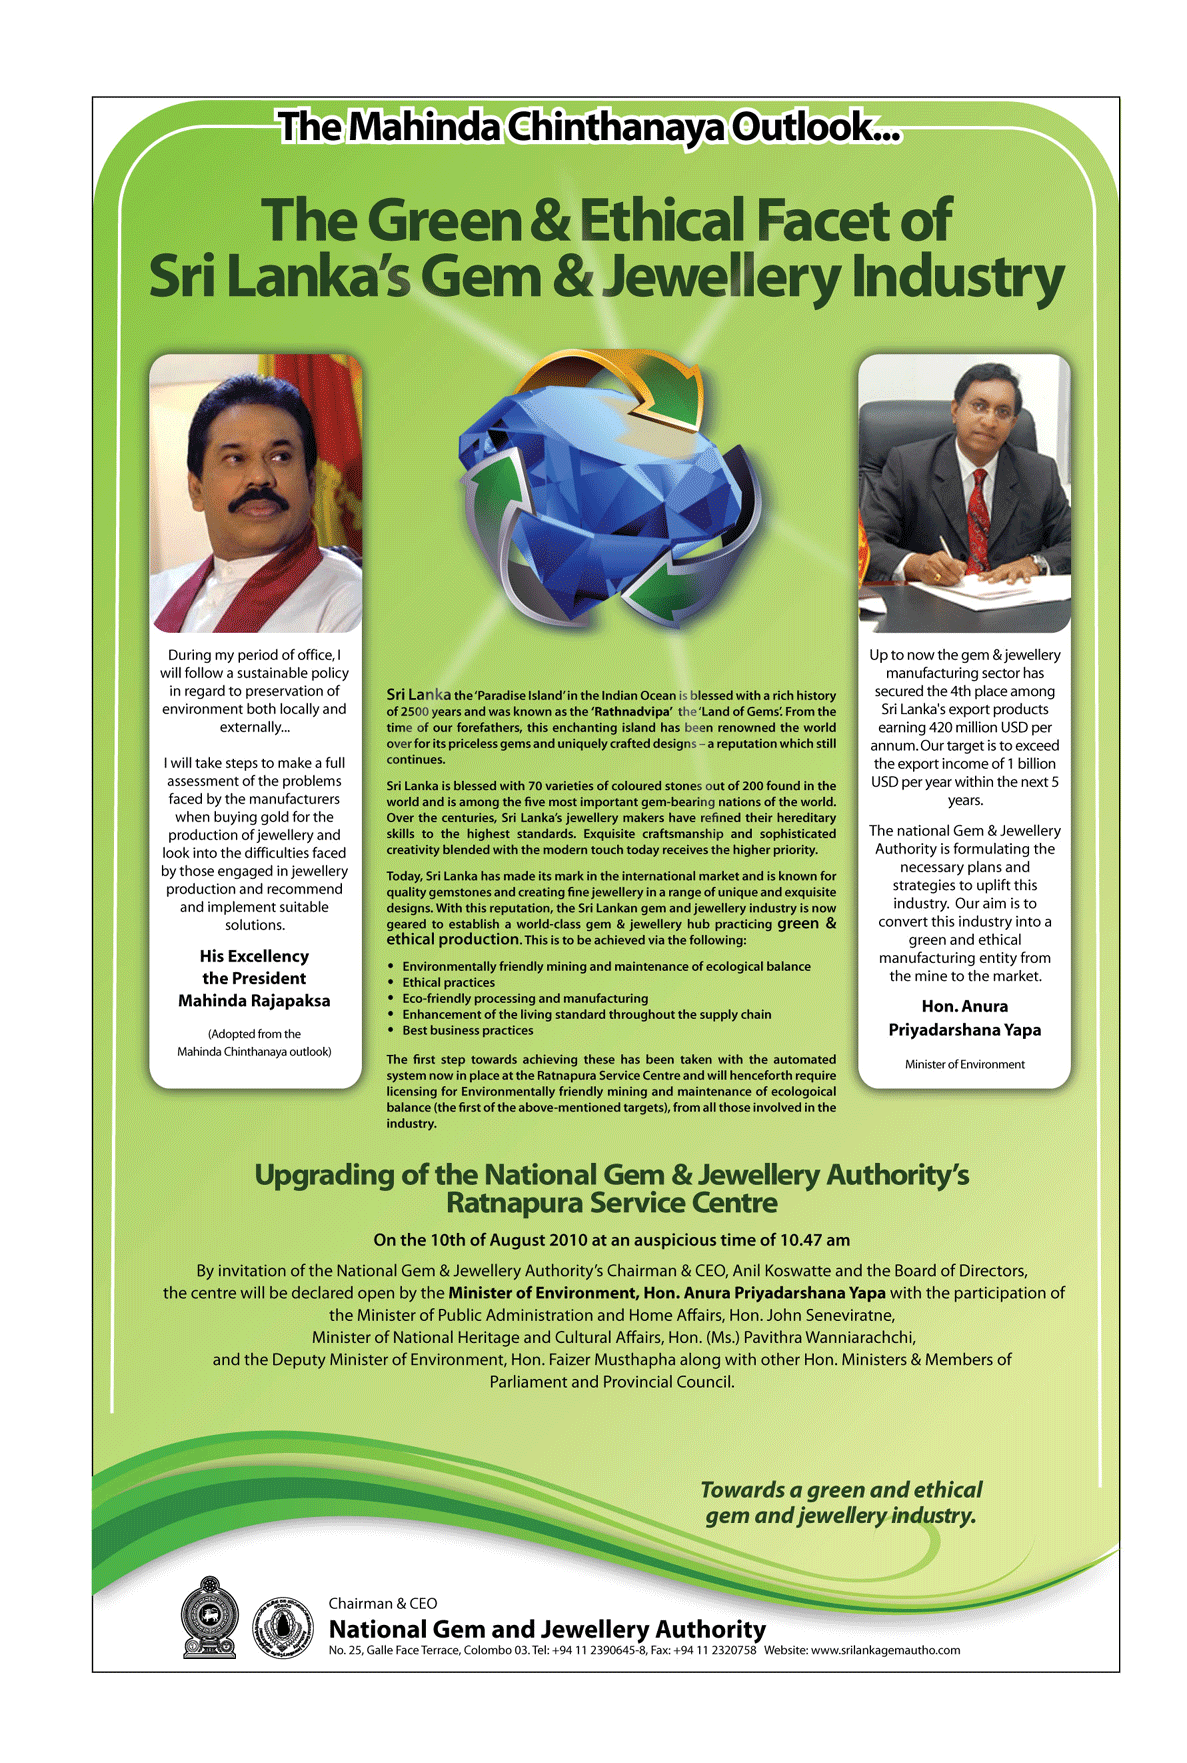 The Green & Ethical Facet of Sri Lanka's Jewellery Indutry- Click to enlarge